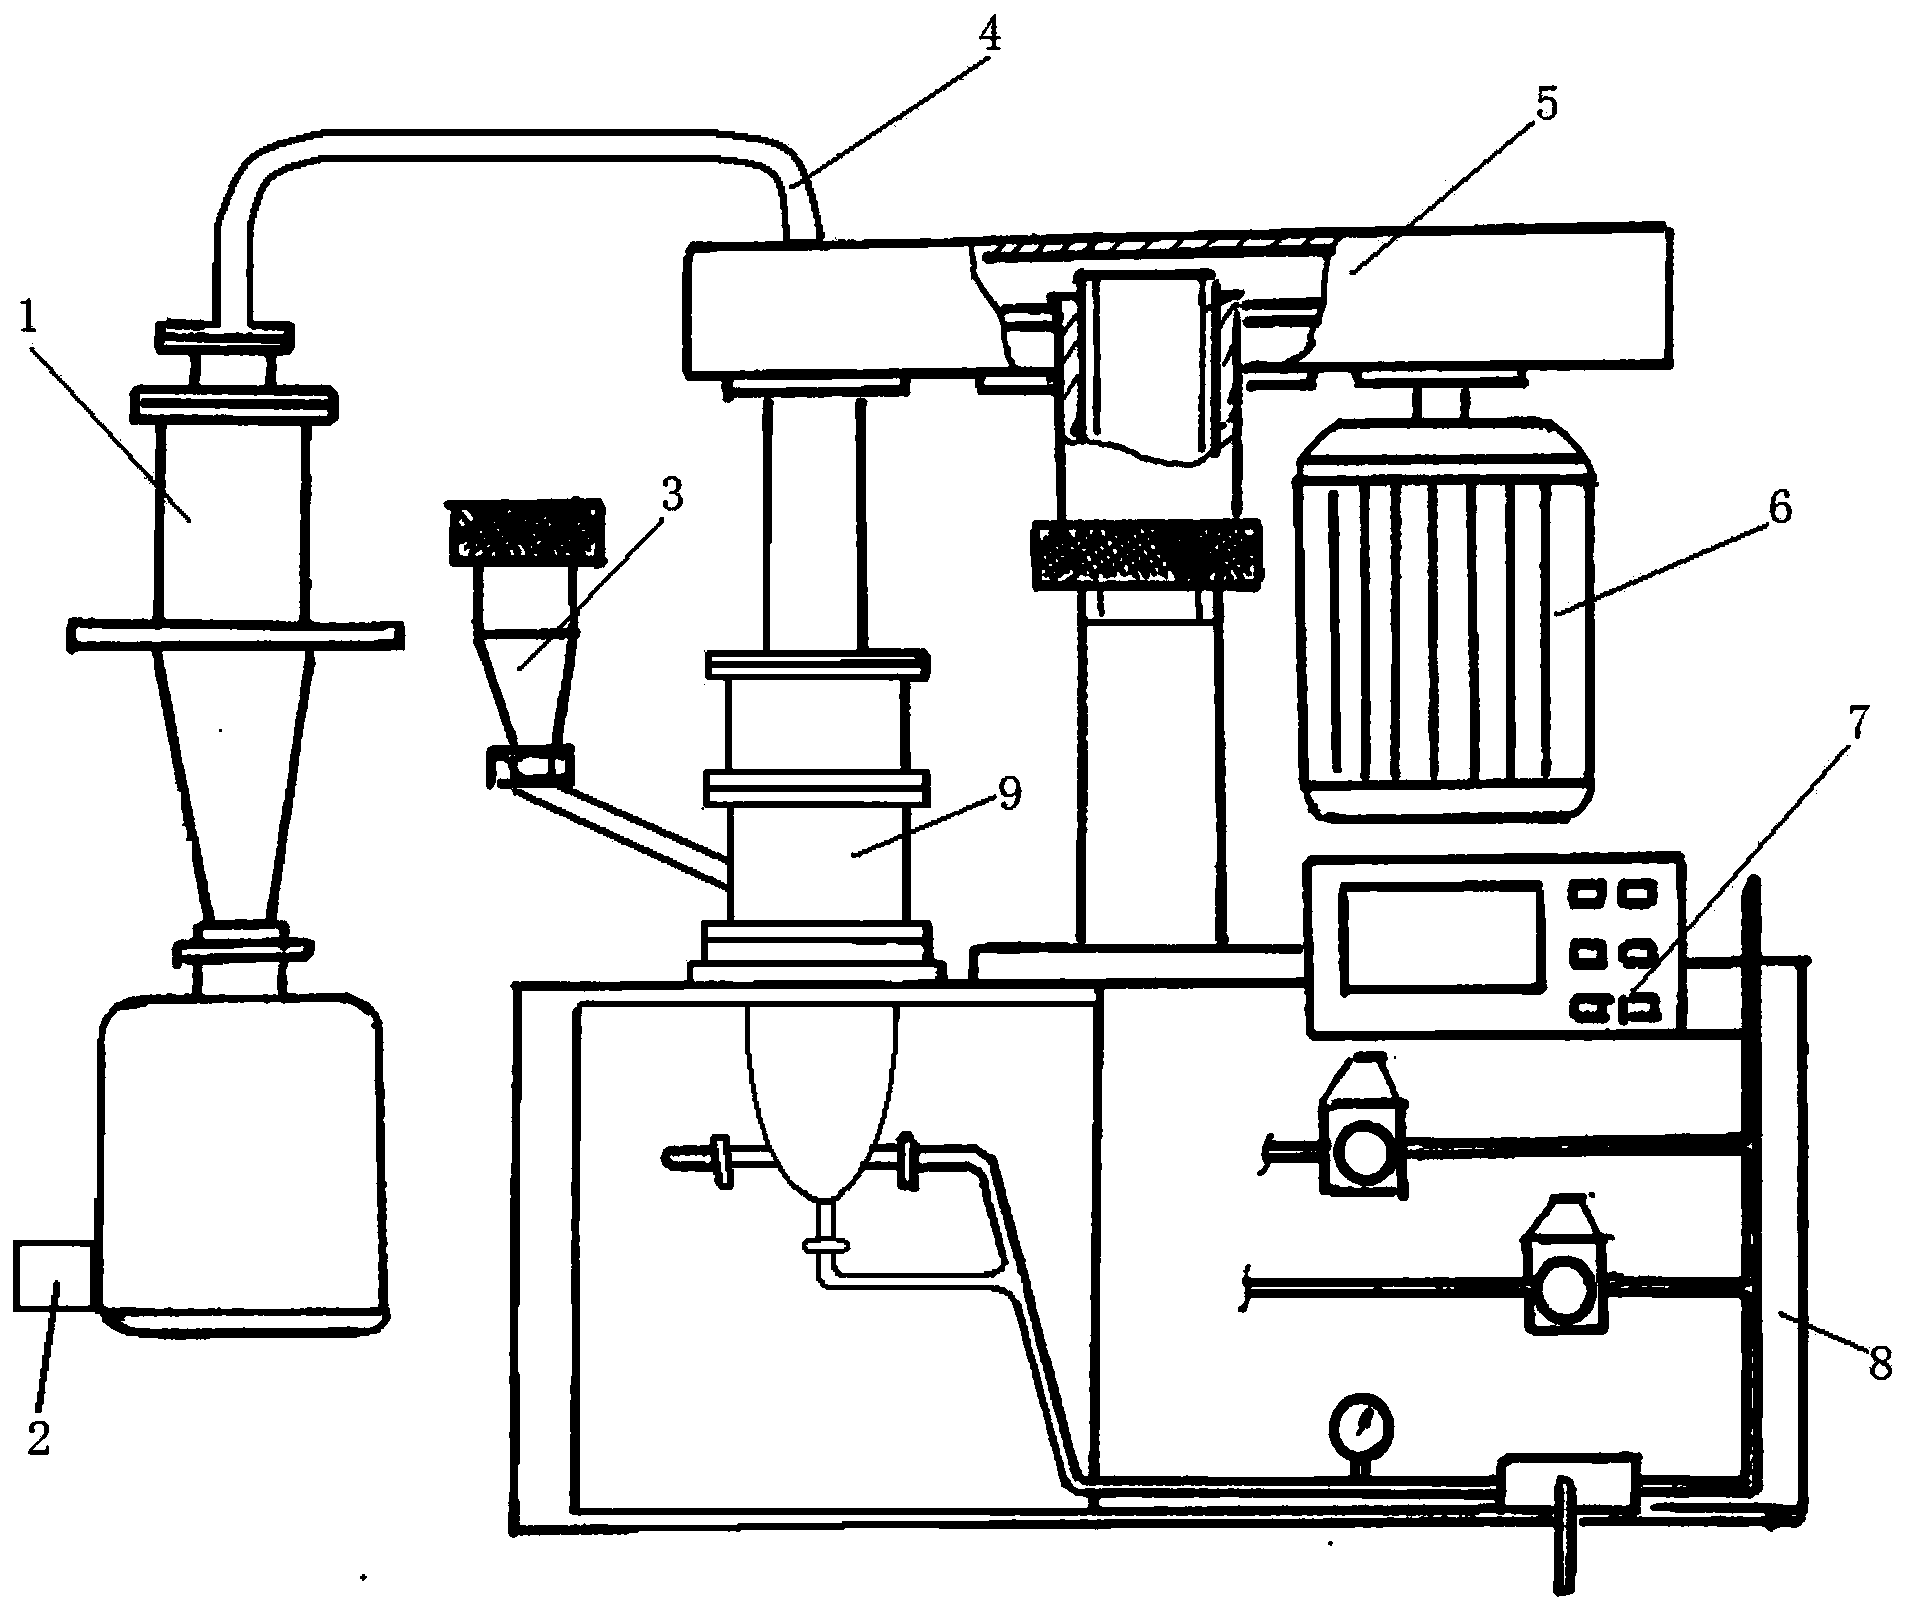 Miniature negative pressure jet mill having crushing cavity with ellipsoidal structure